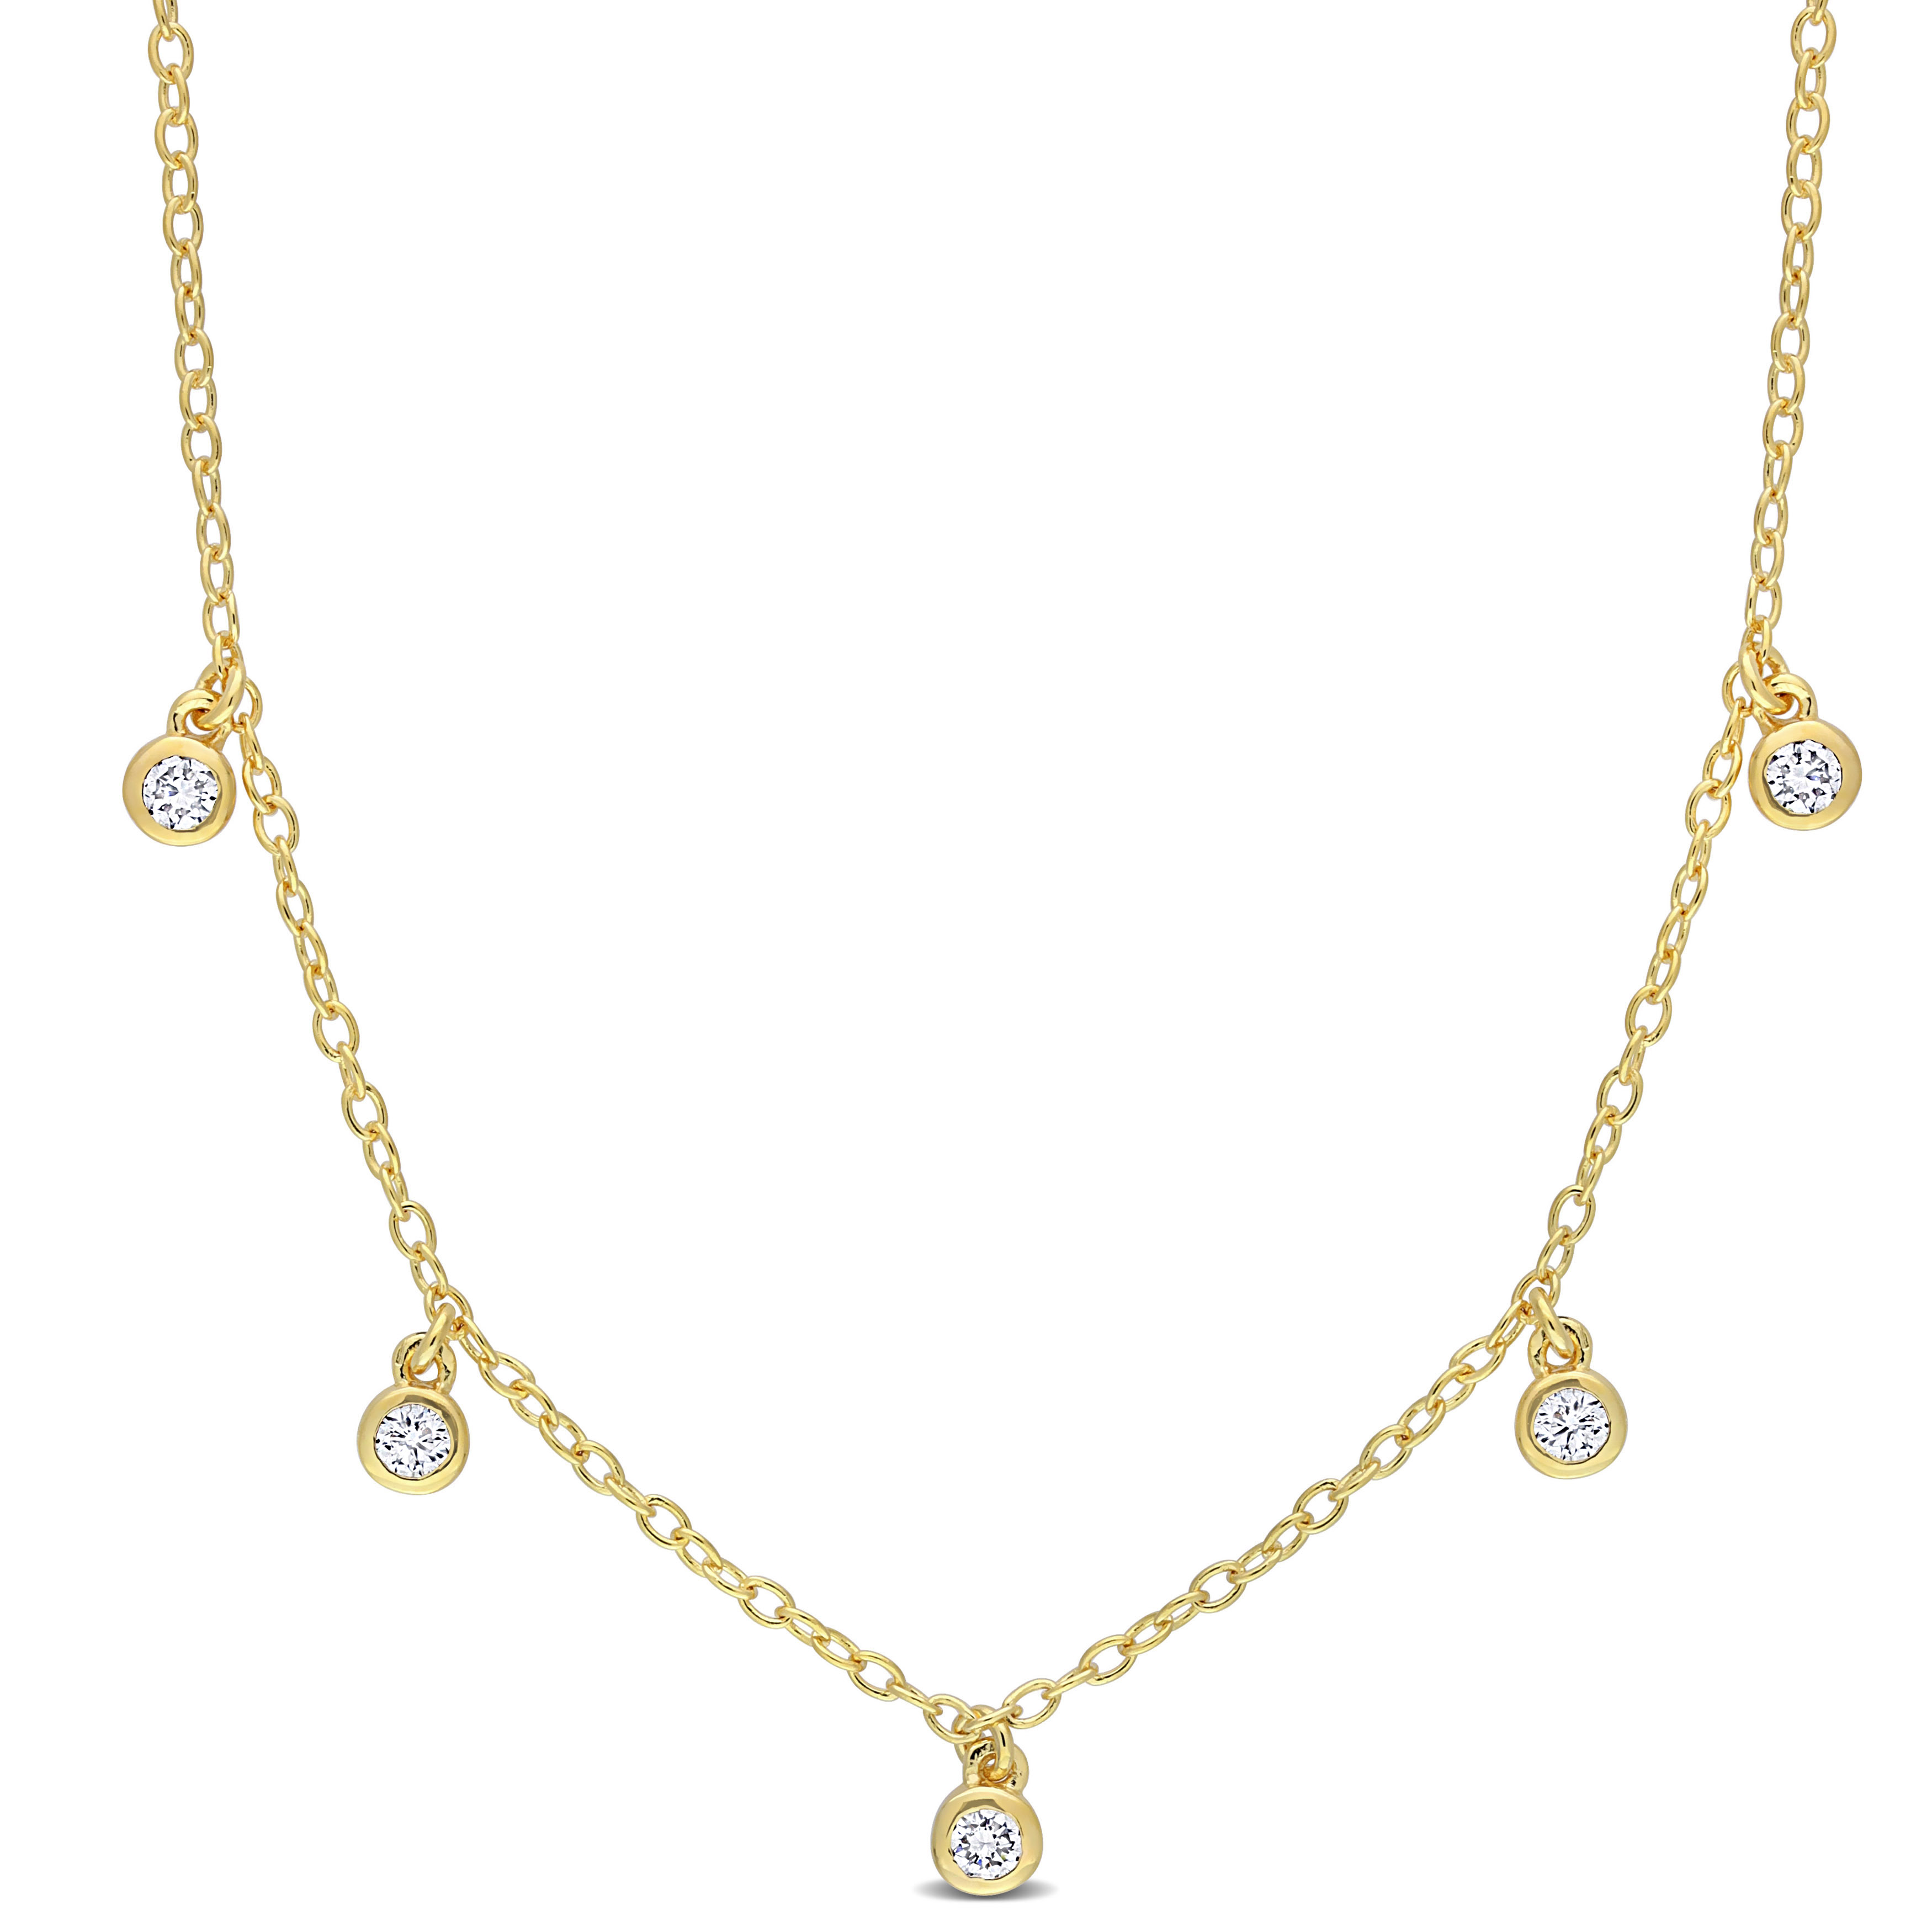 1/6 CT TGW Lab Created Diamond Station Necklace in 18k Yellow Gold Plated Sterling Silver - 16 in.